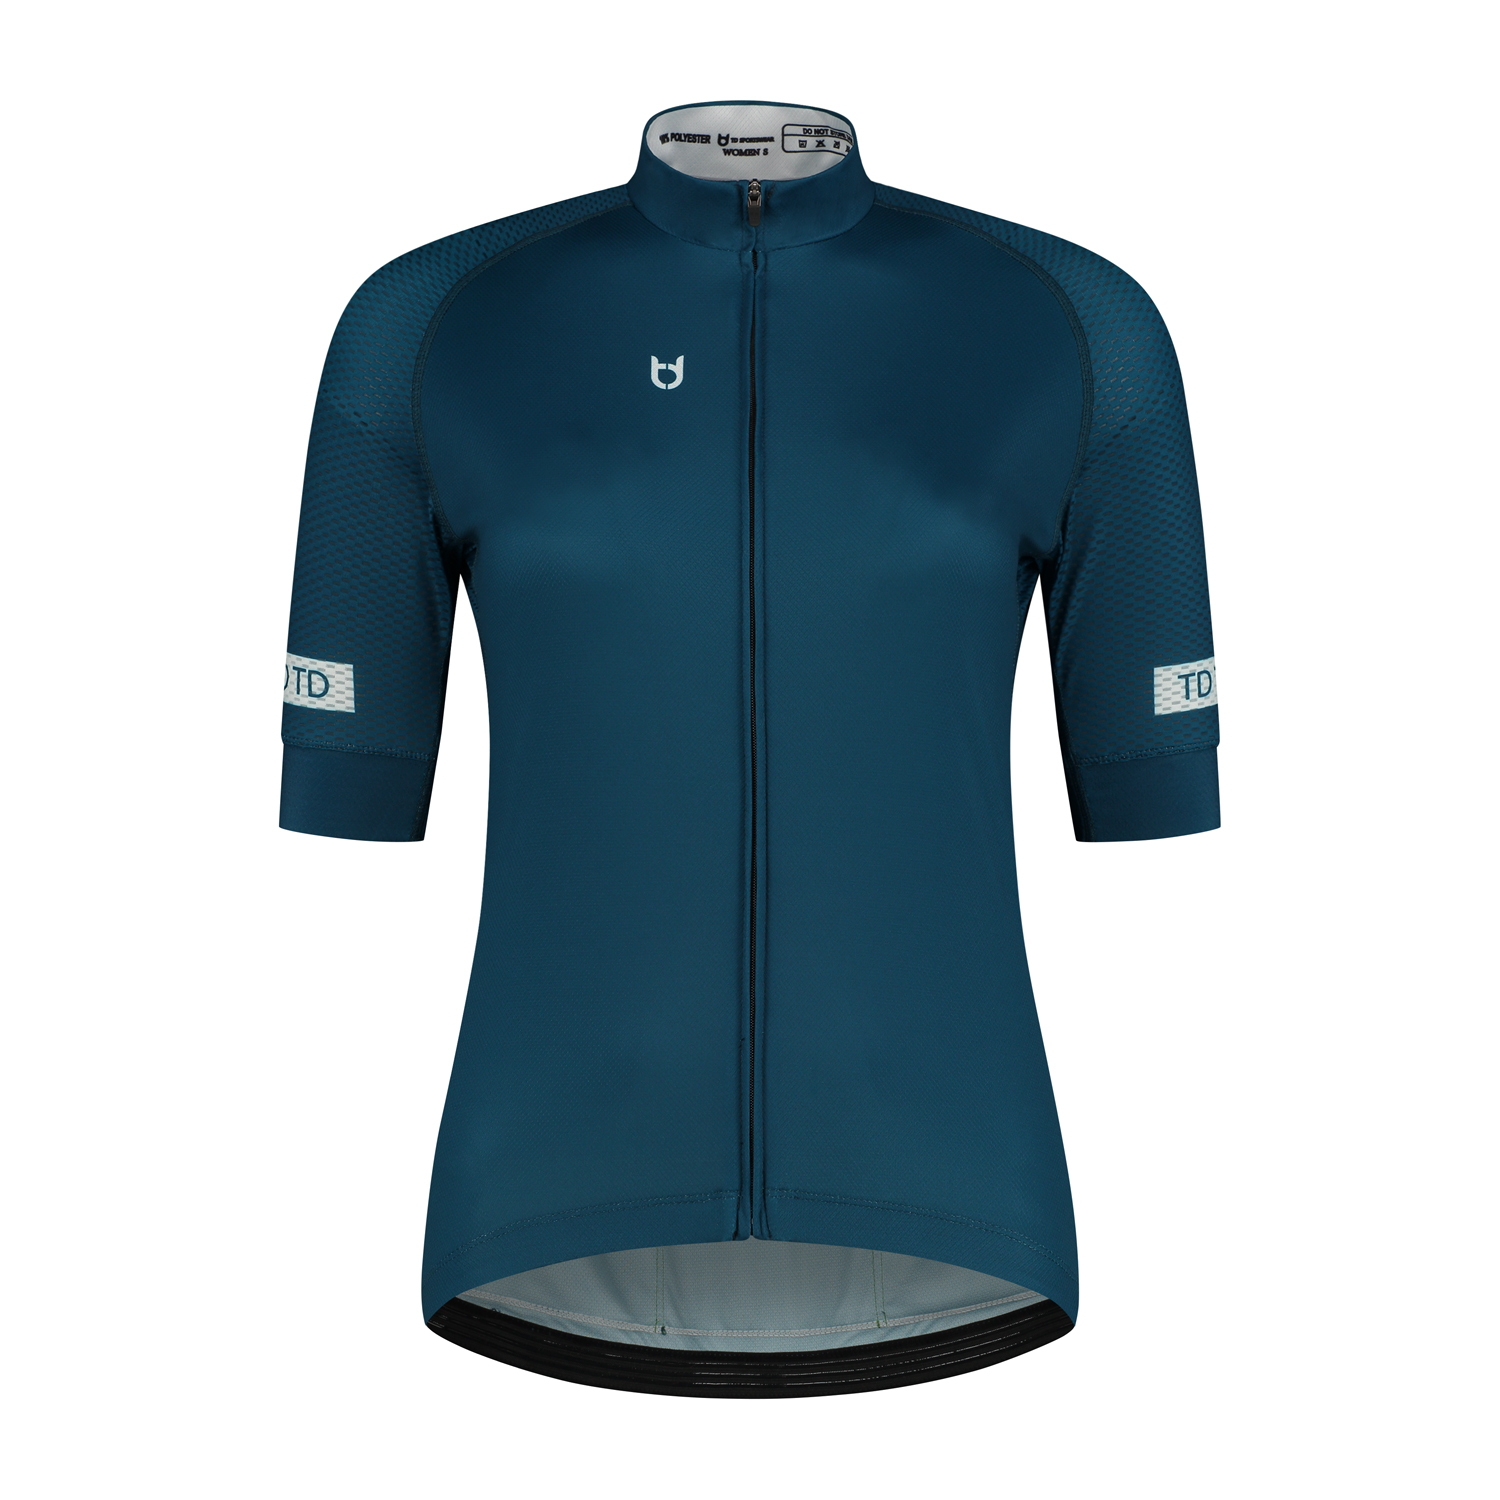 Front side women's cycling jersey short sleeves dark blue color and women's sizing TD